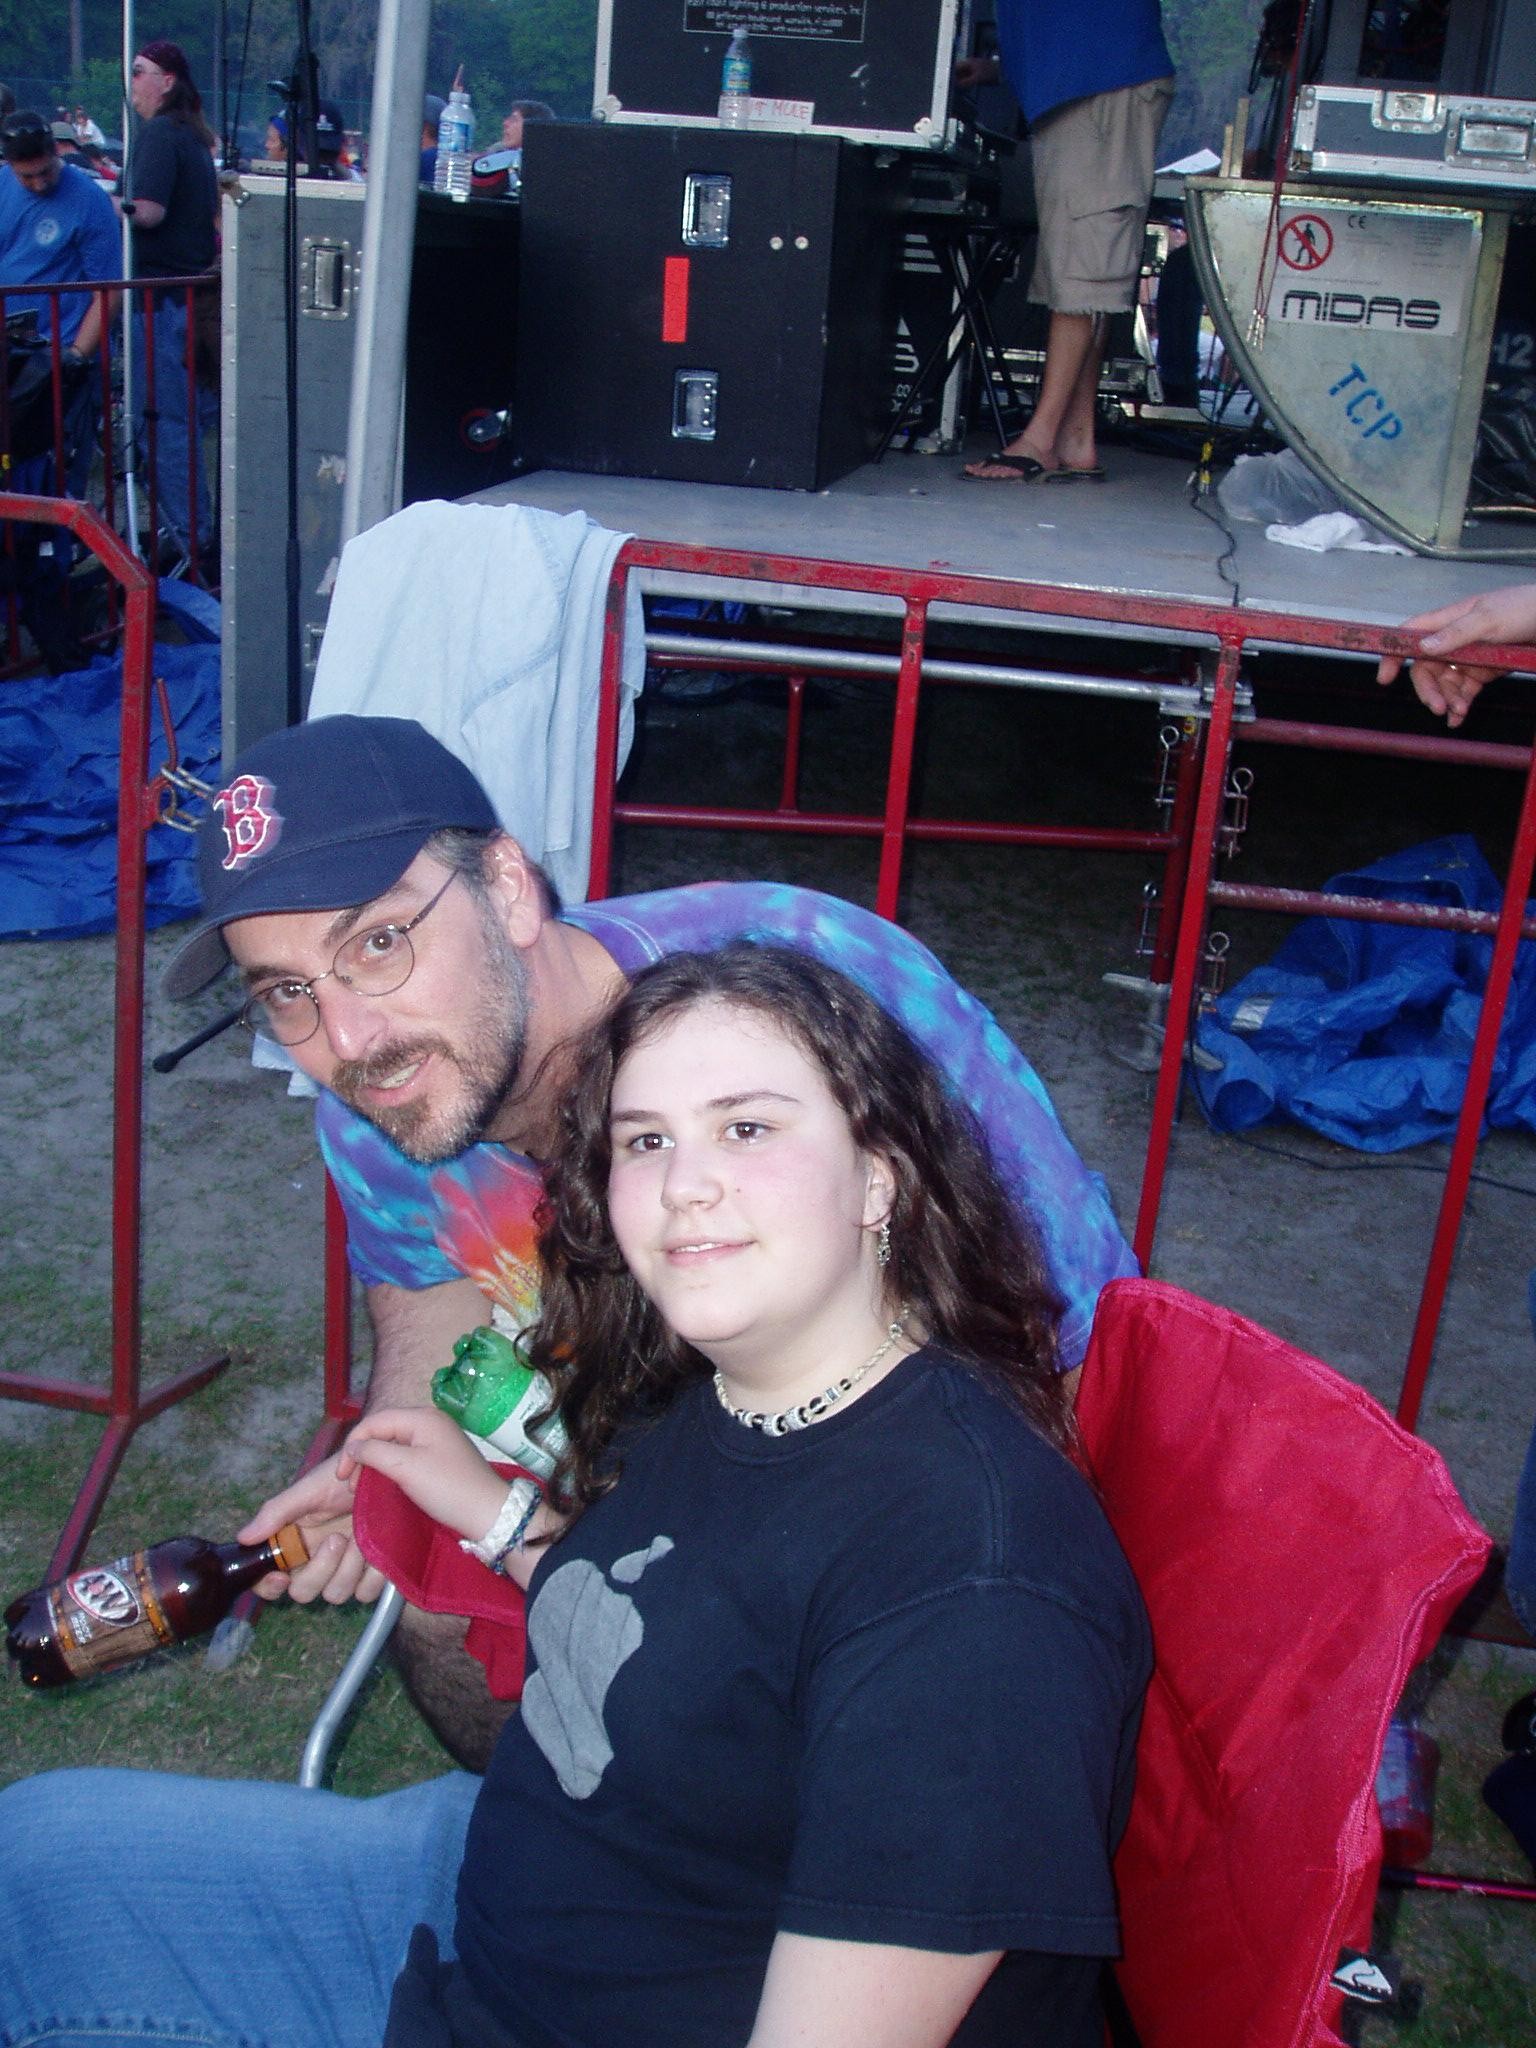 Picture snapped by TanDan - Emily and me during Mule at Wanee on 4/14/06.